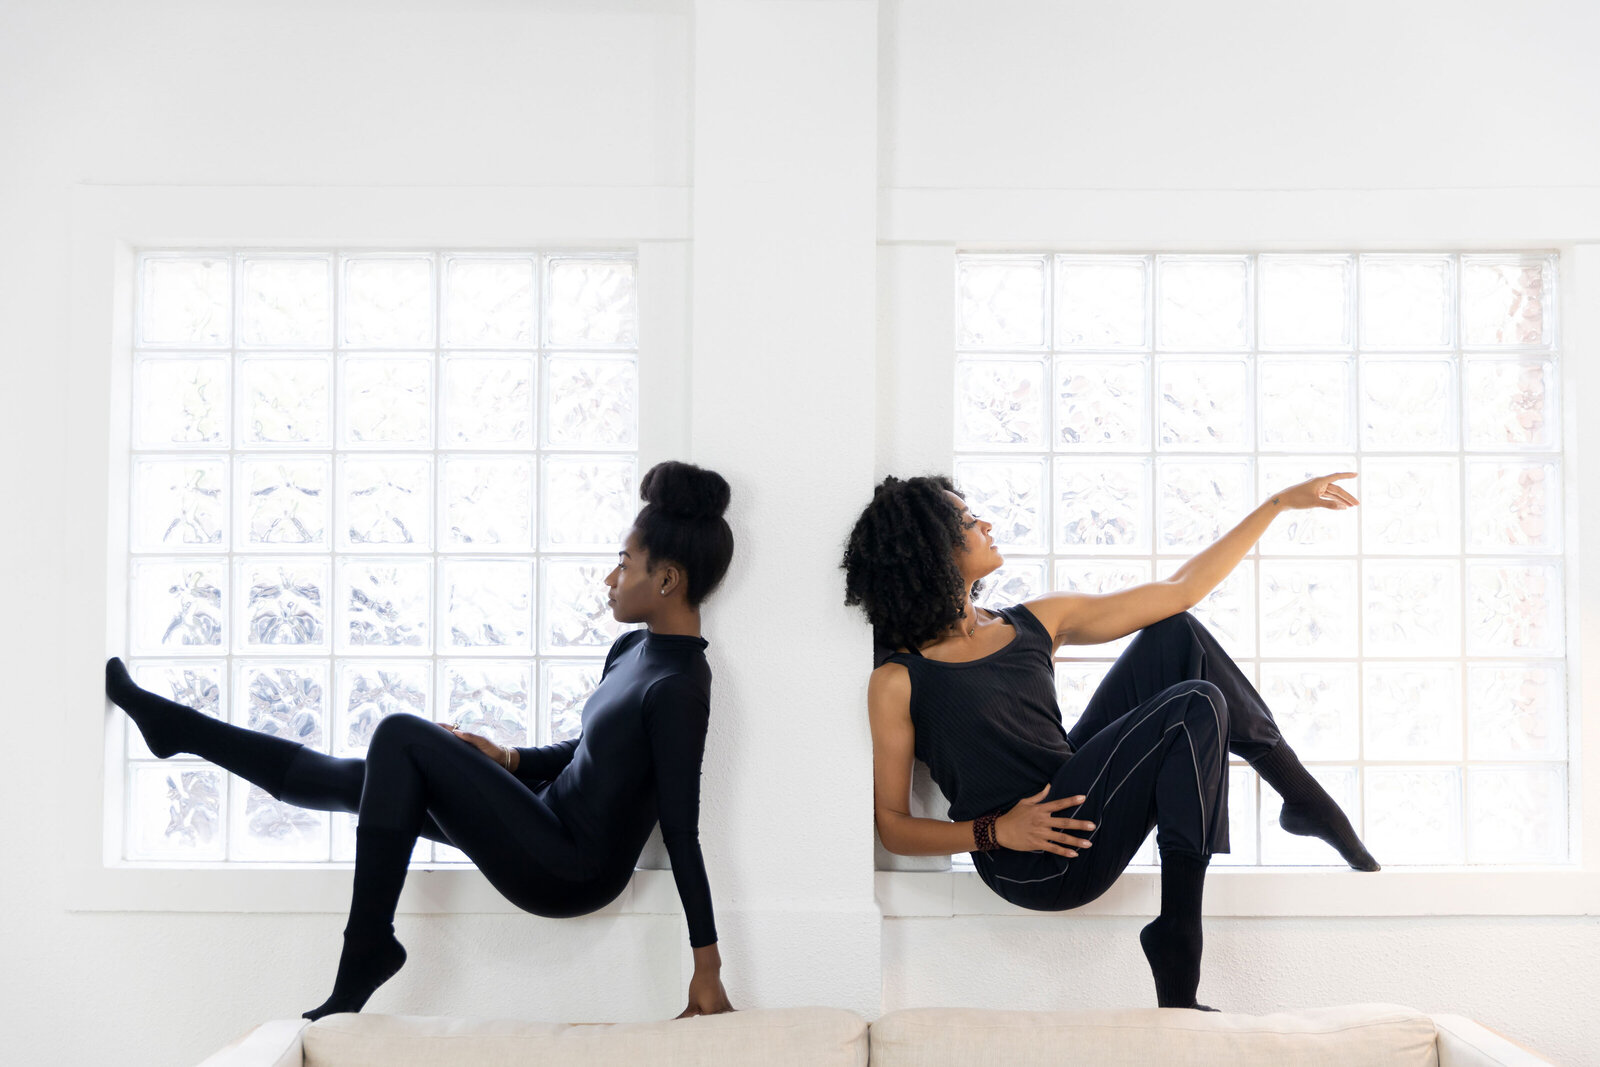 two seated Black women dancers with natural hair wearing black posing in windows